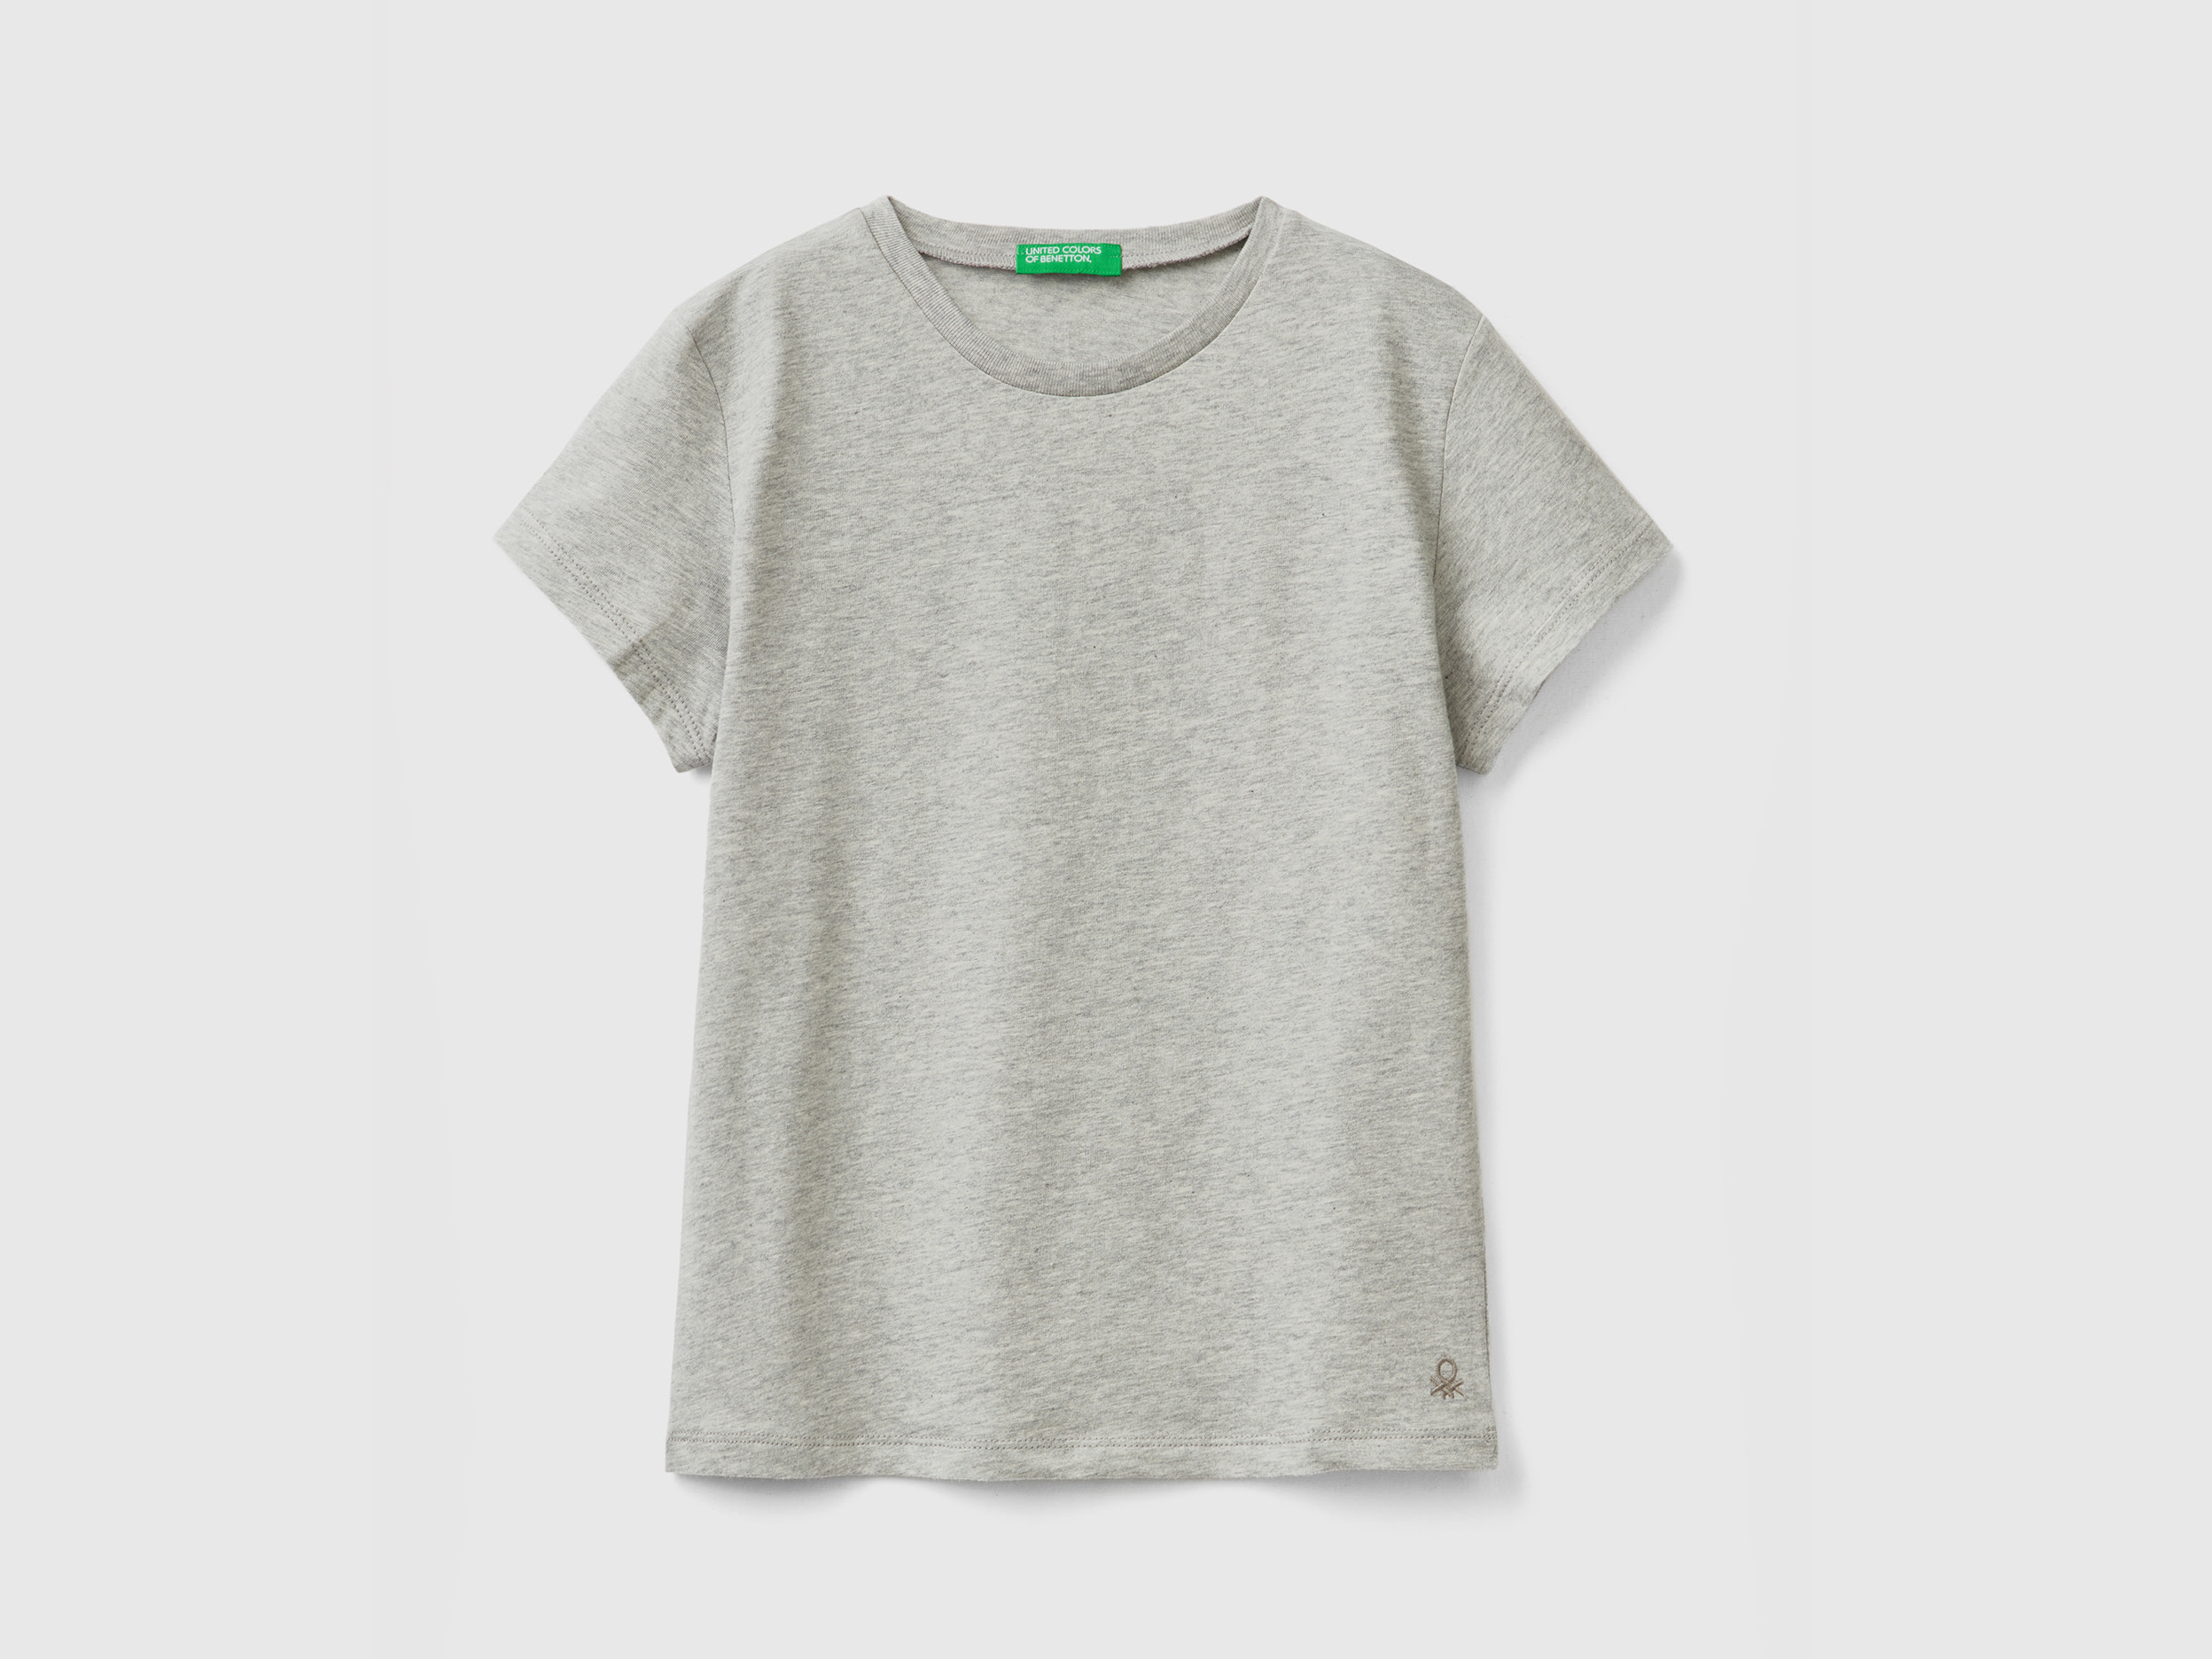 Image of Benetton, T-shirt In Pure Organic Cotton, size S, Light Gray, Kids